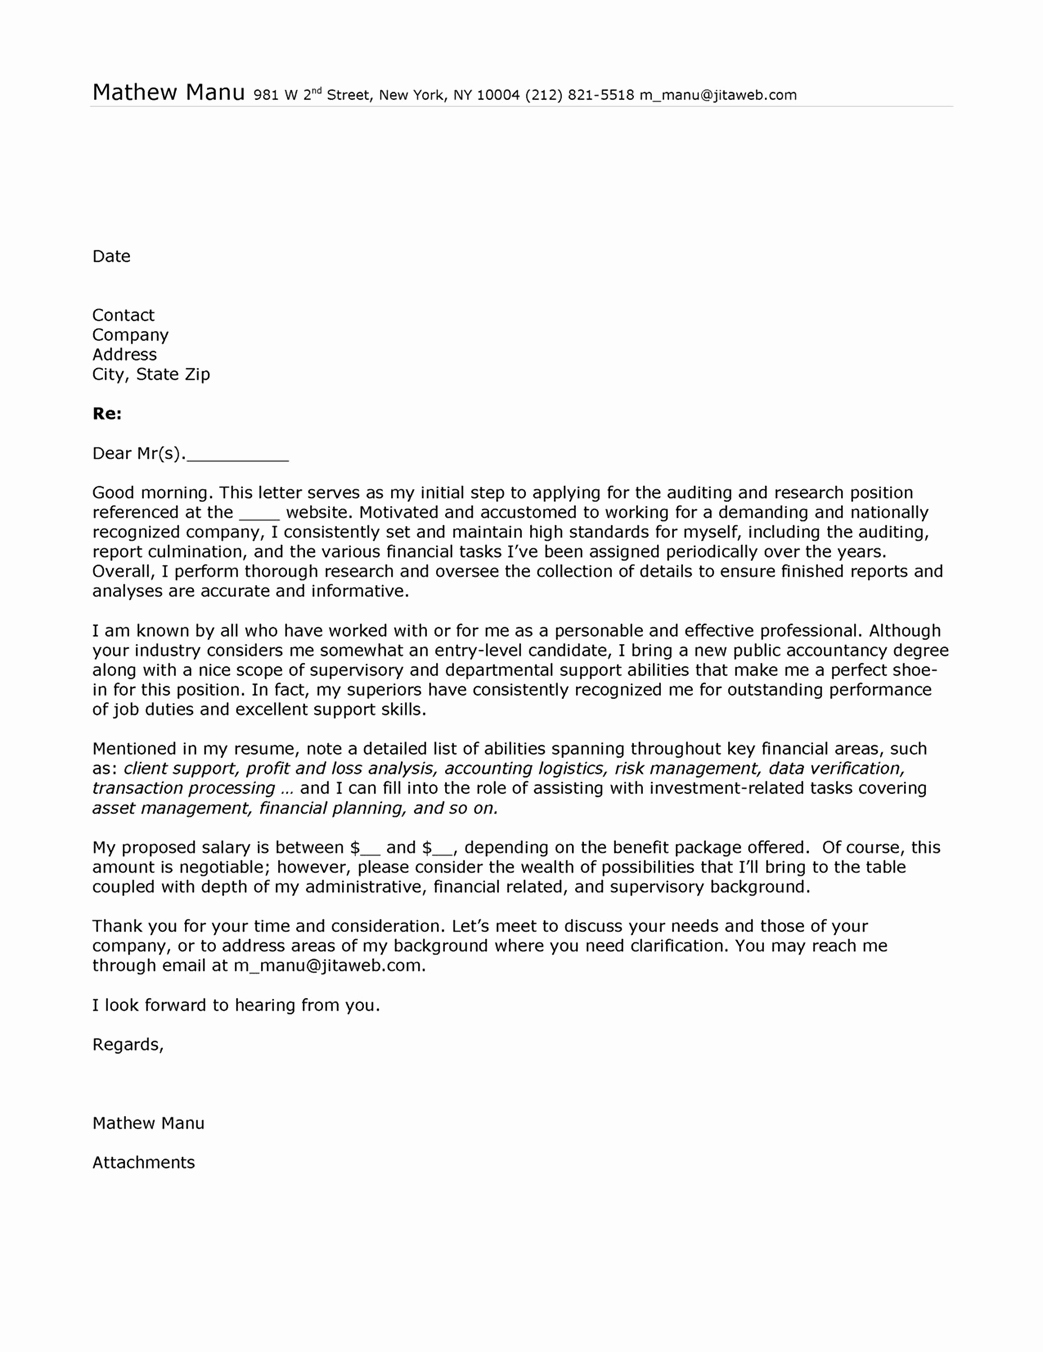 Business Cover Letter Template Awesome Cover Letter Example for Auditor